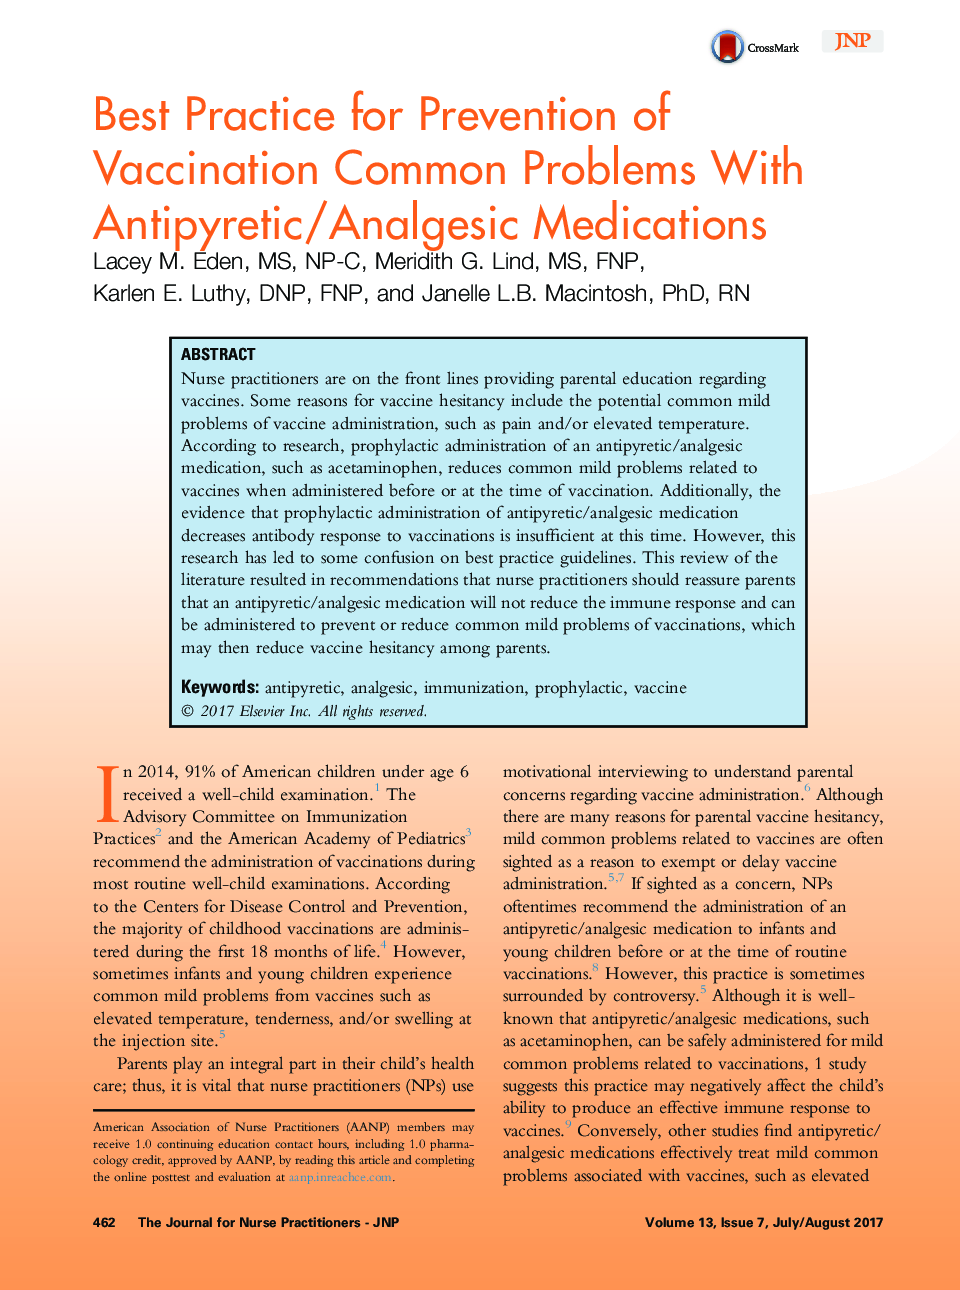 Best Practice for Prevention of Vaccination Common Problems With Antipyretic/Analgesic Medications